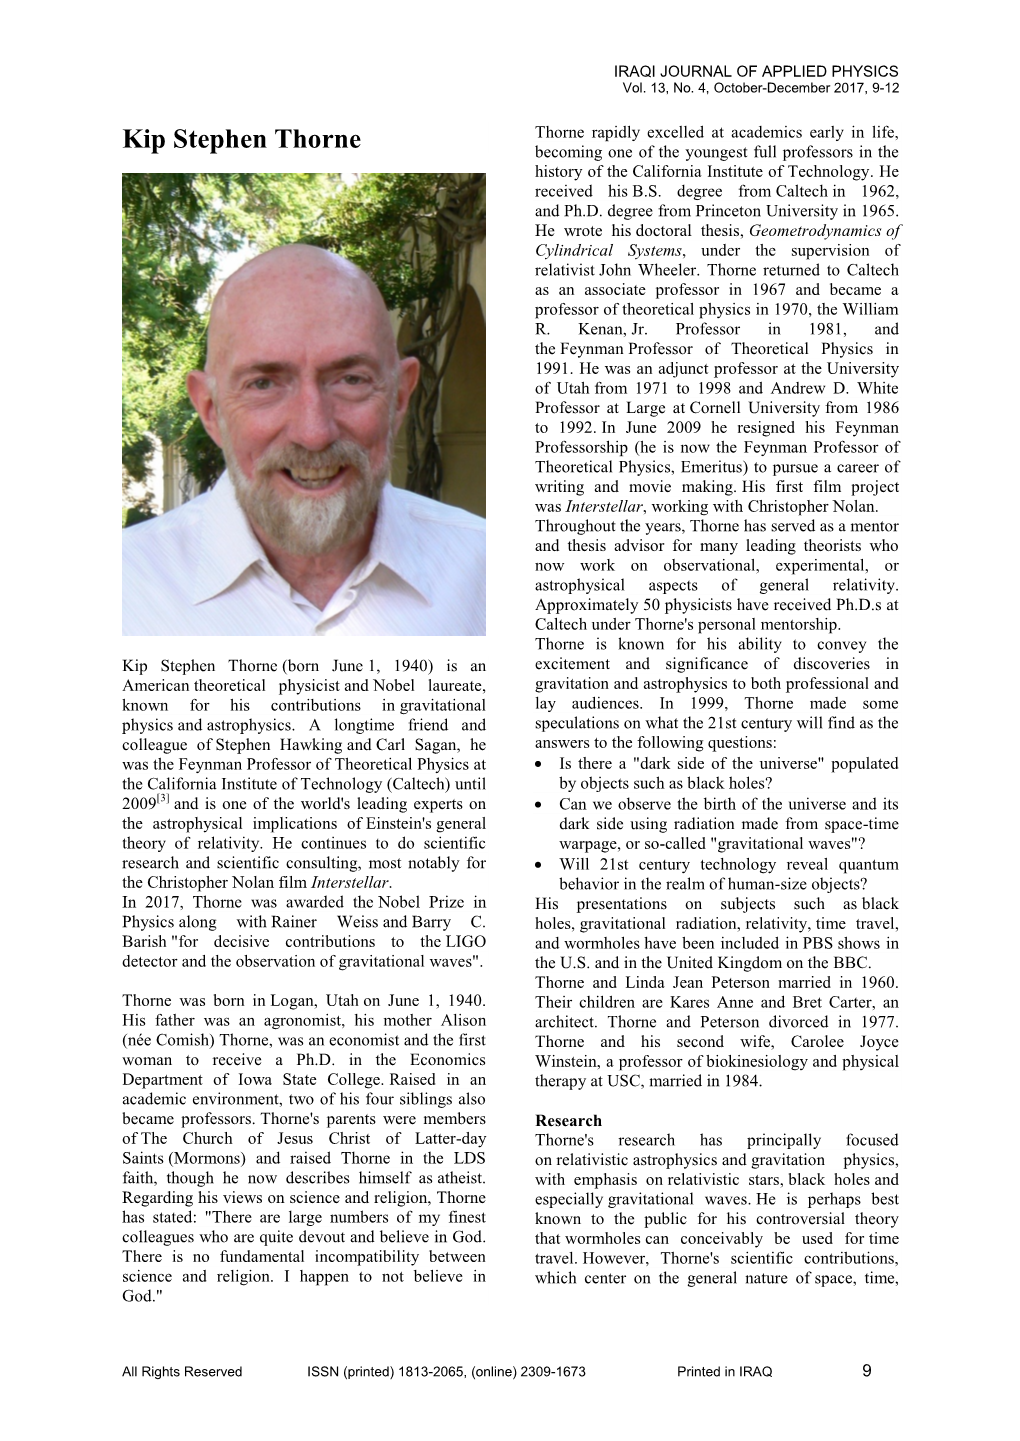 Kip Stephen Thorne Becoming One of the Youngest Full Professors in the History of the California Institute of Technology